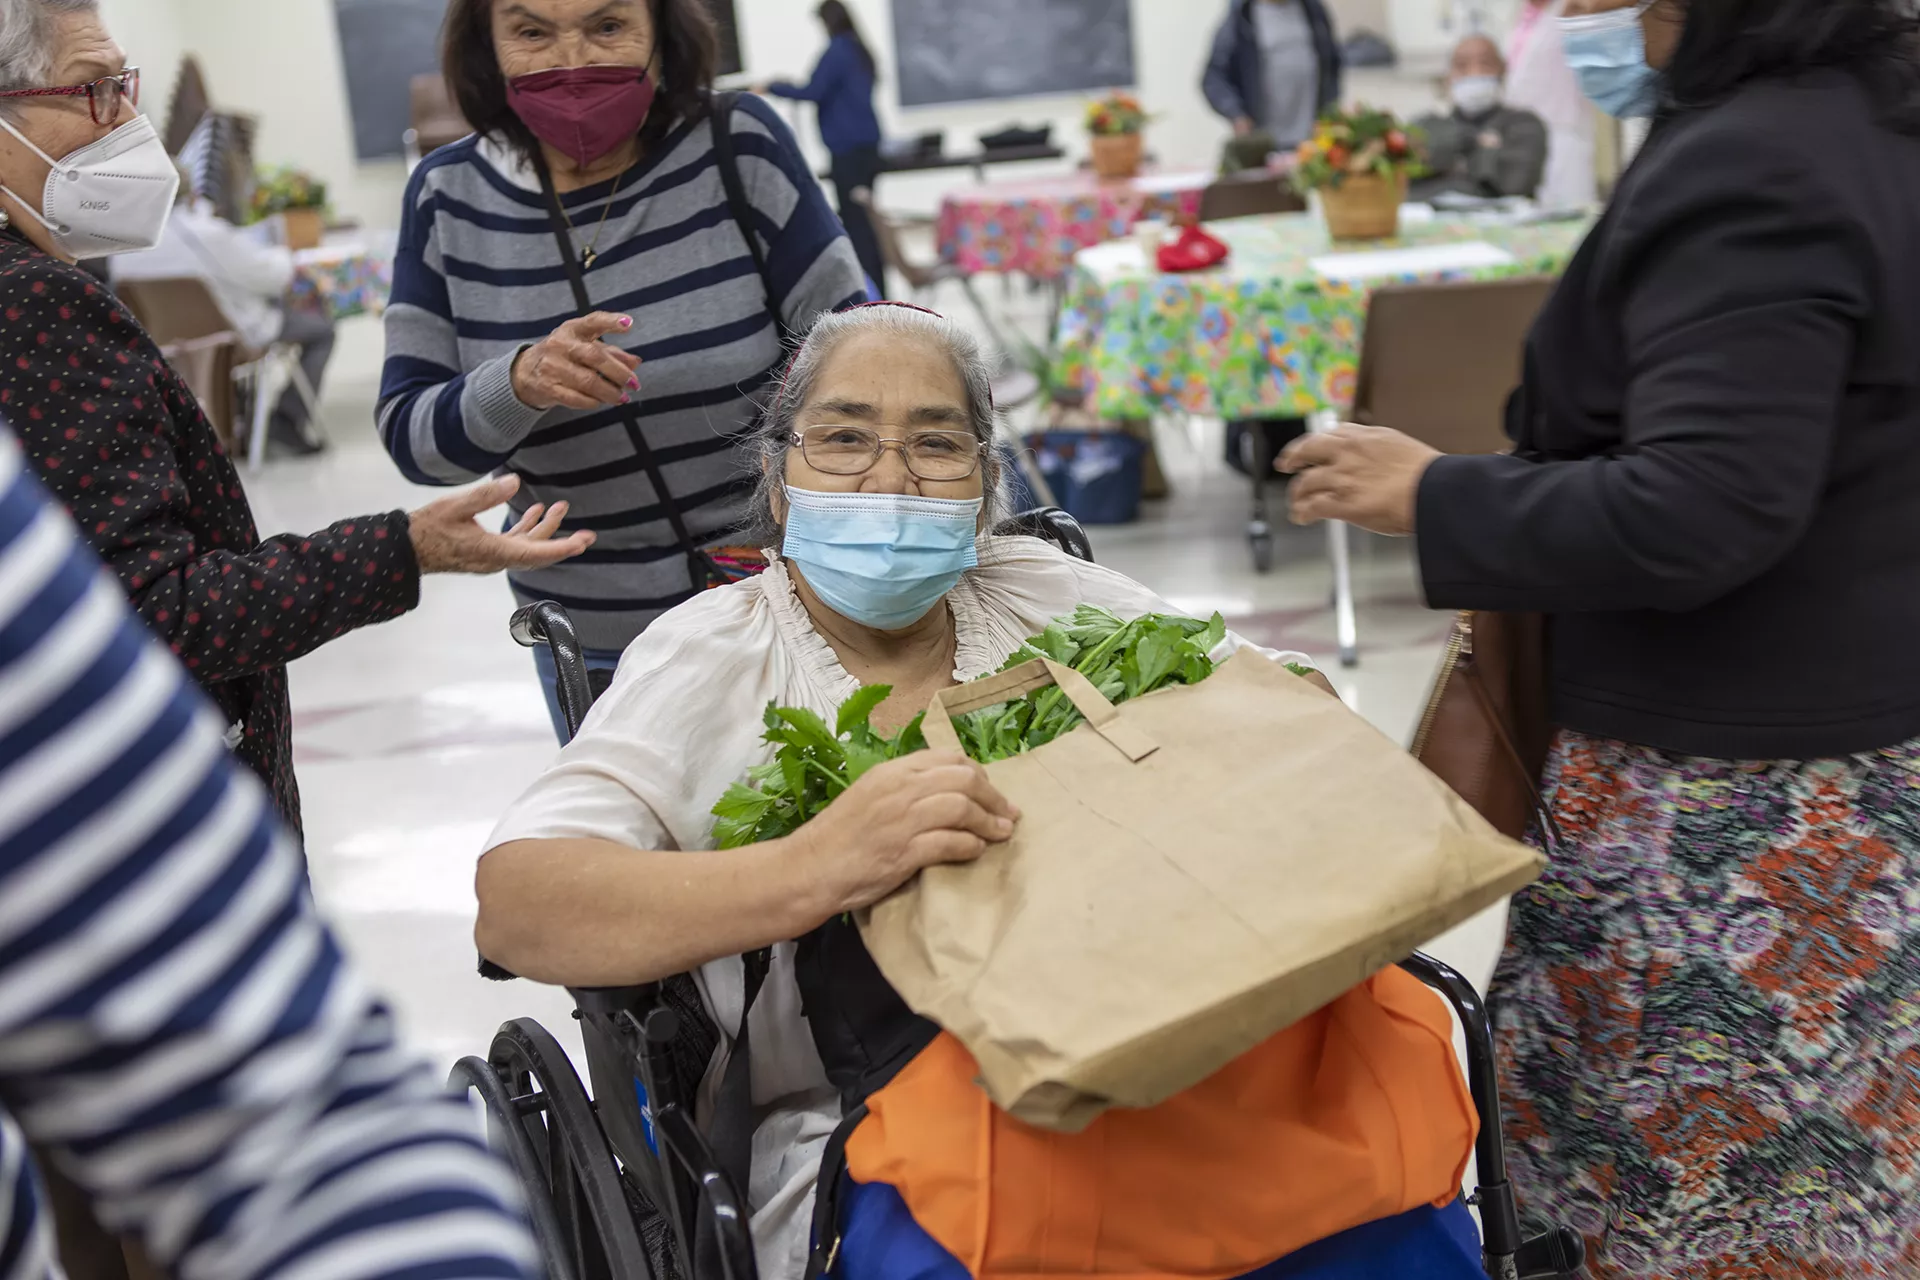 Woman in wheelchair getting food from food bank